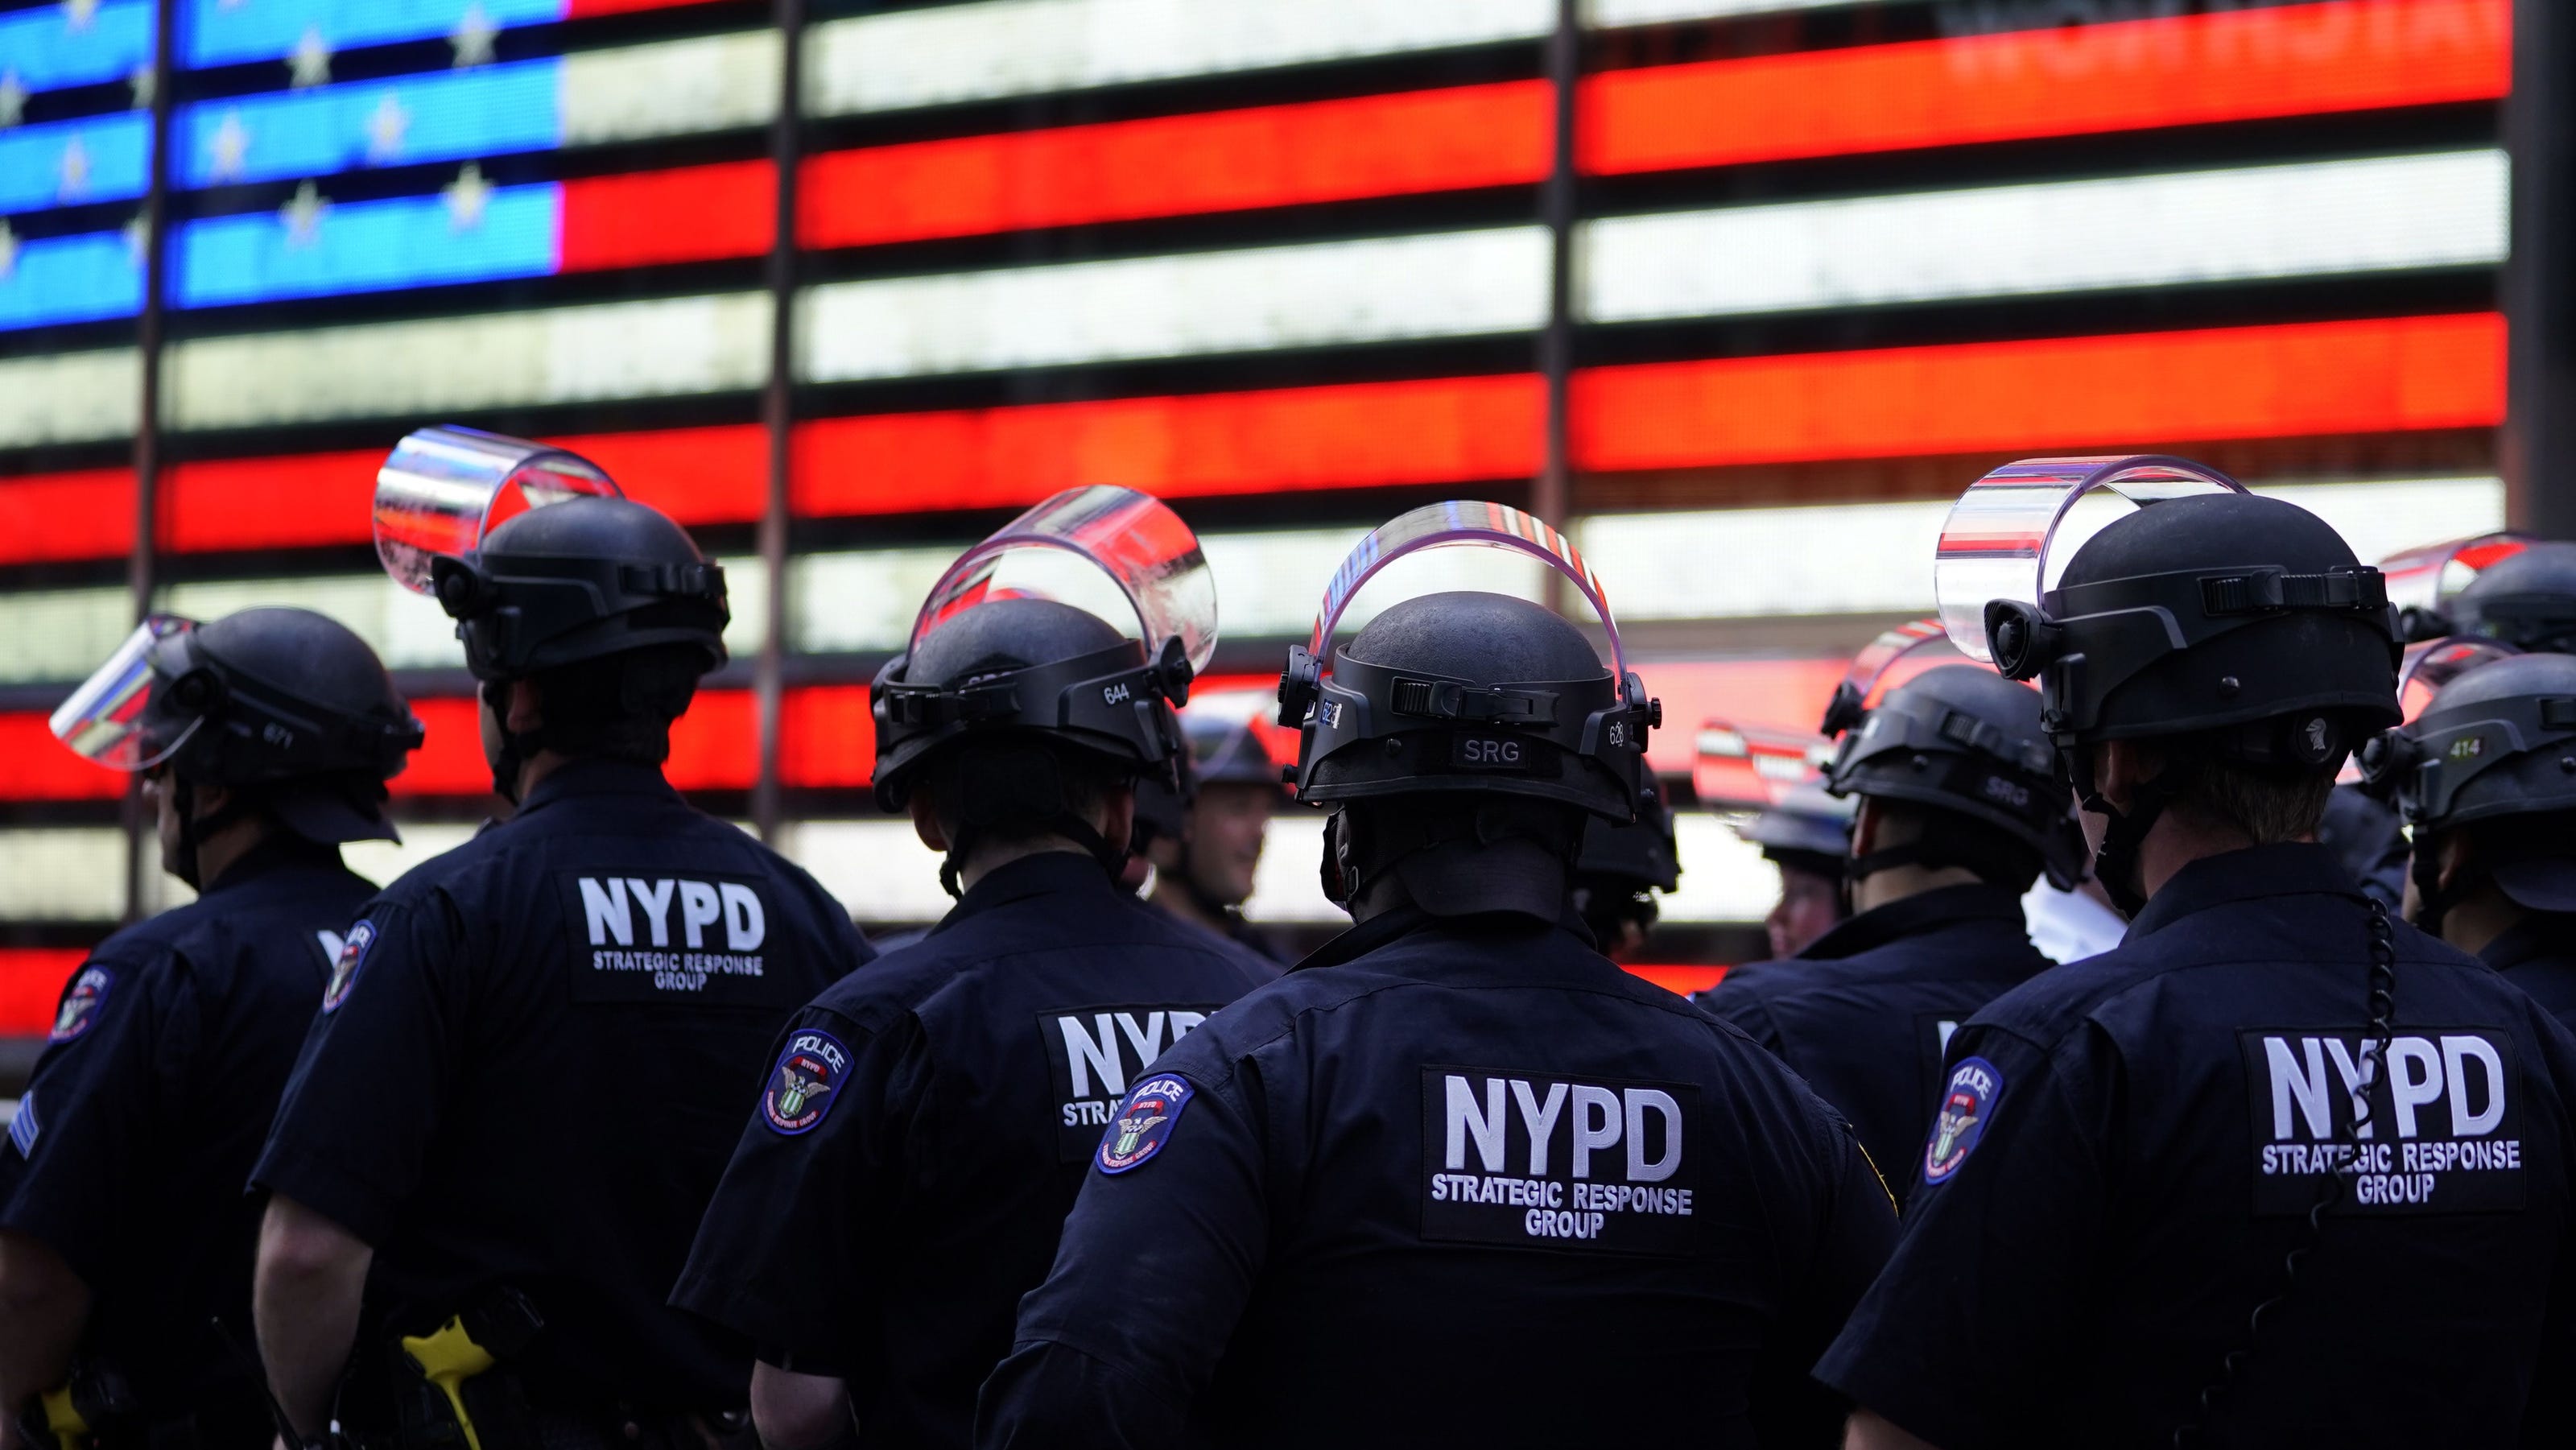 Nypd Disciplinary Records Filed With Ccrb Can Be Public Judge Says